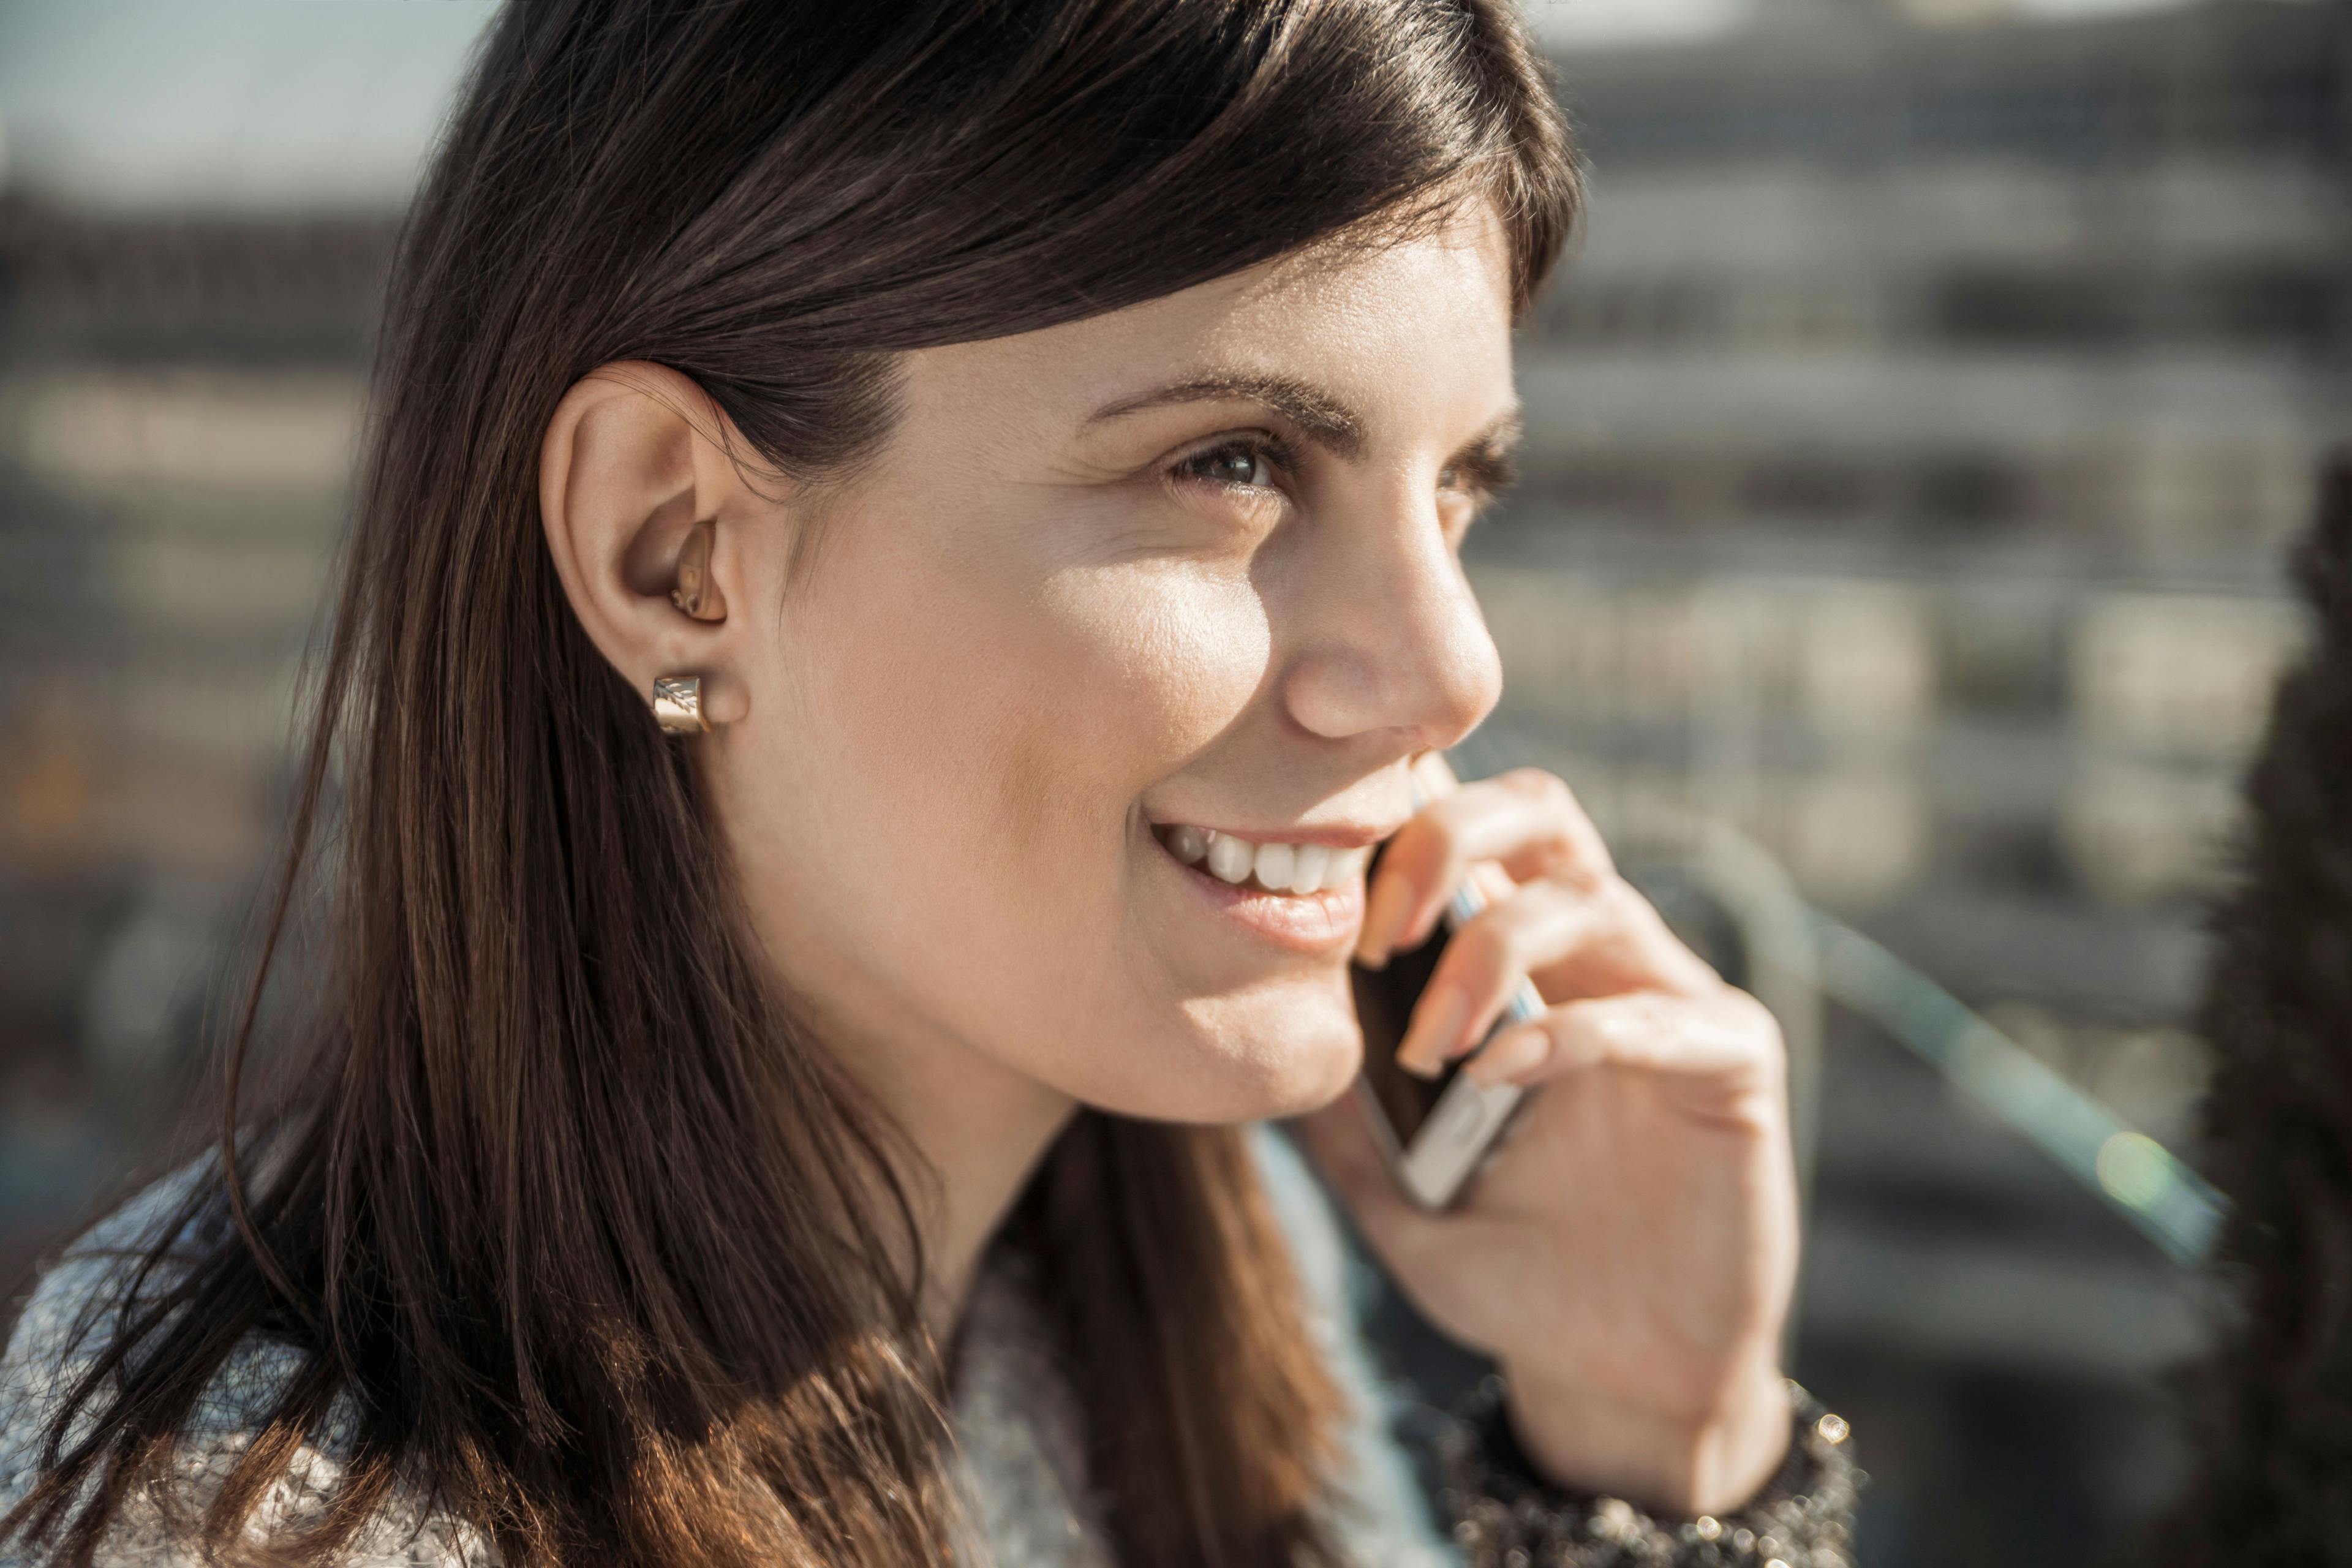 A smiling young woman with a hearing aid talks on the phone.